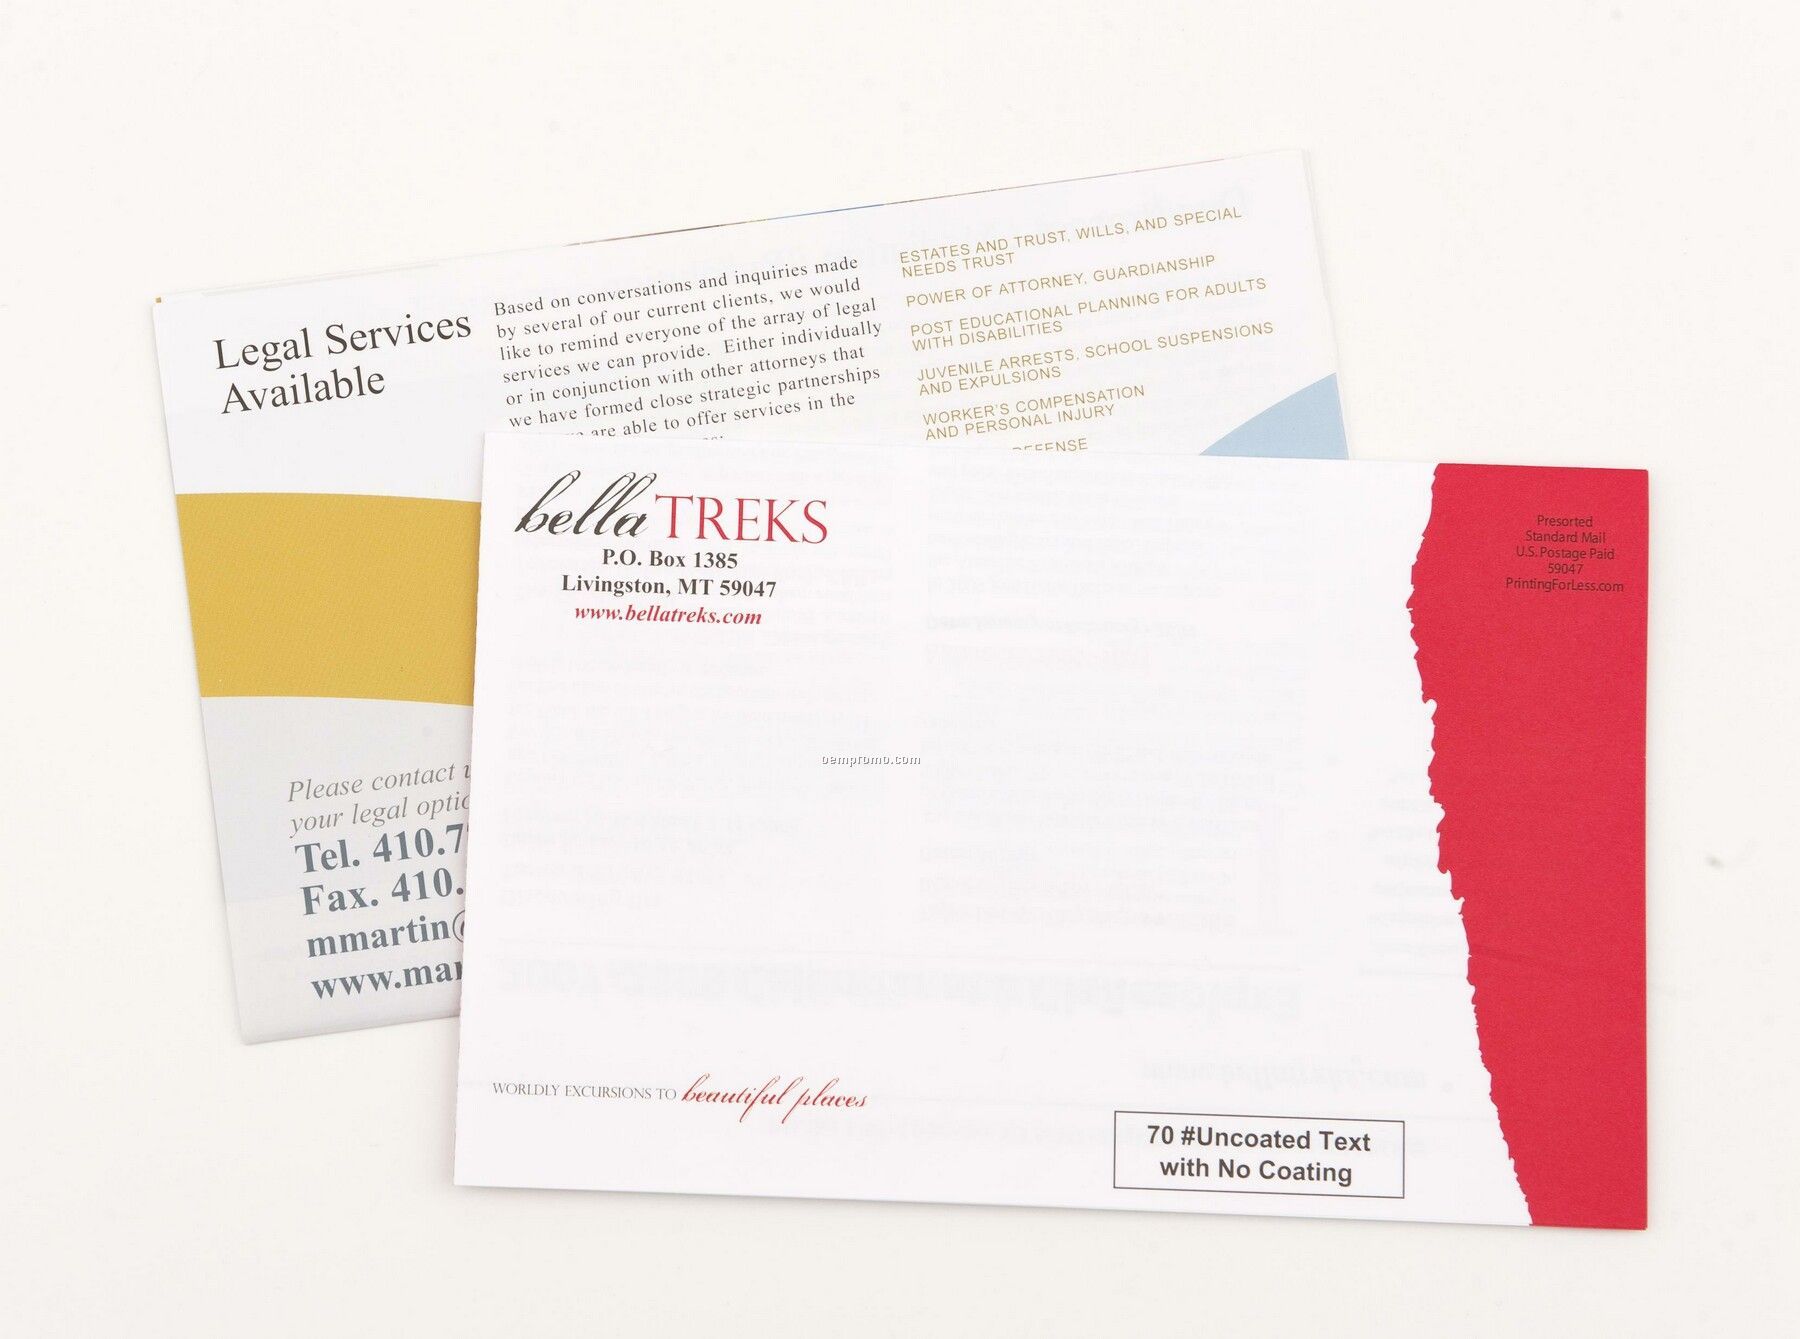 Newsletter - 70 Lb. Uncoated Text/ 8.5"X11" (Full Color/ Black)